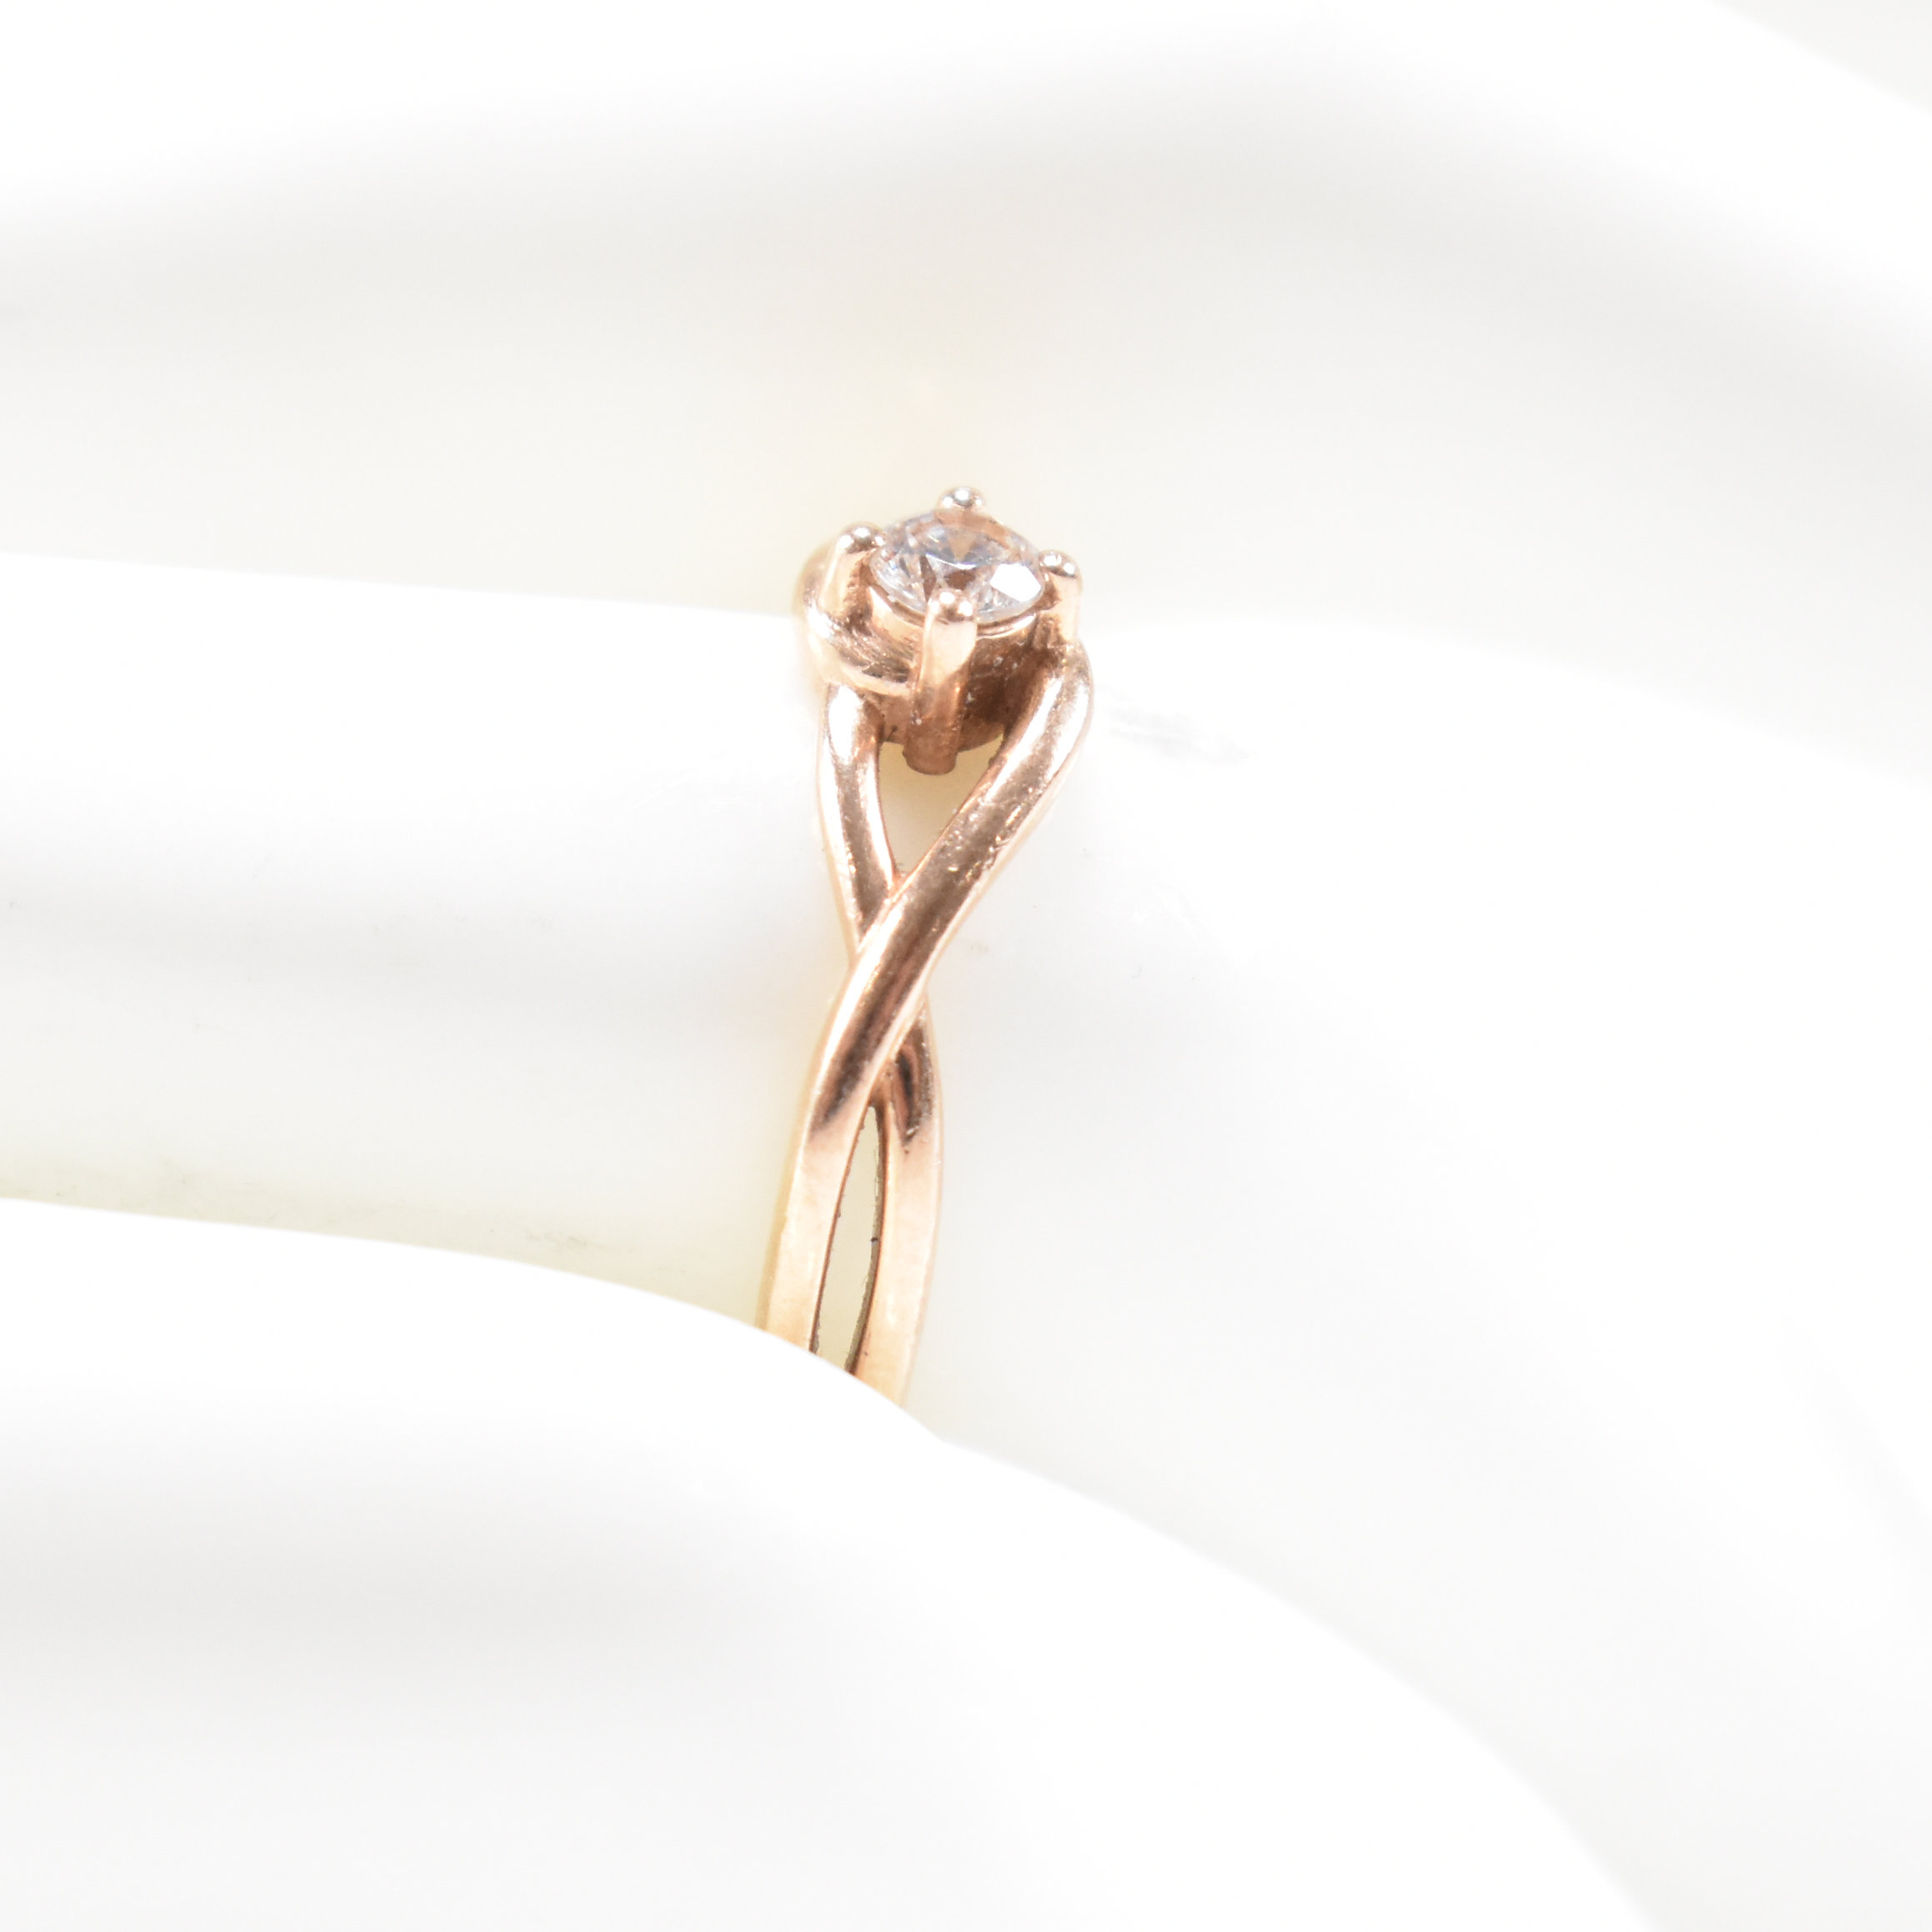 HALLMARKED 9CT ROSE GOLD & WHITE STONE SOLITAIRE CROSSOVER RING - Image 9 of 9